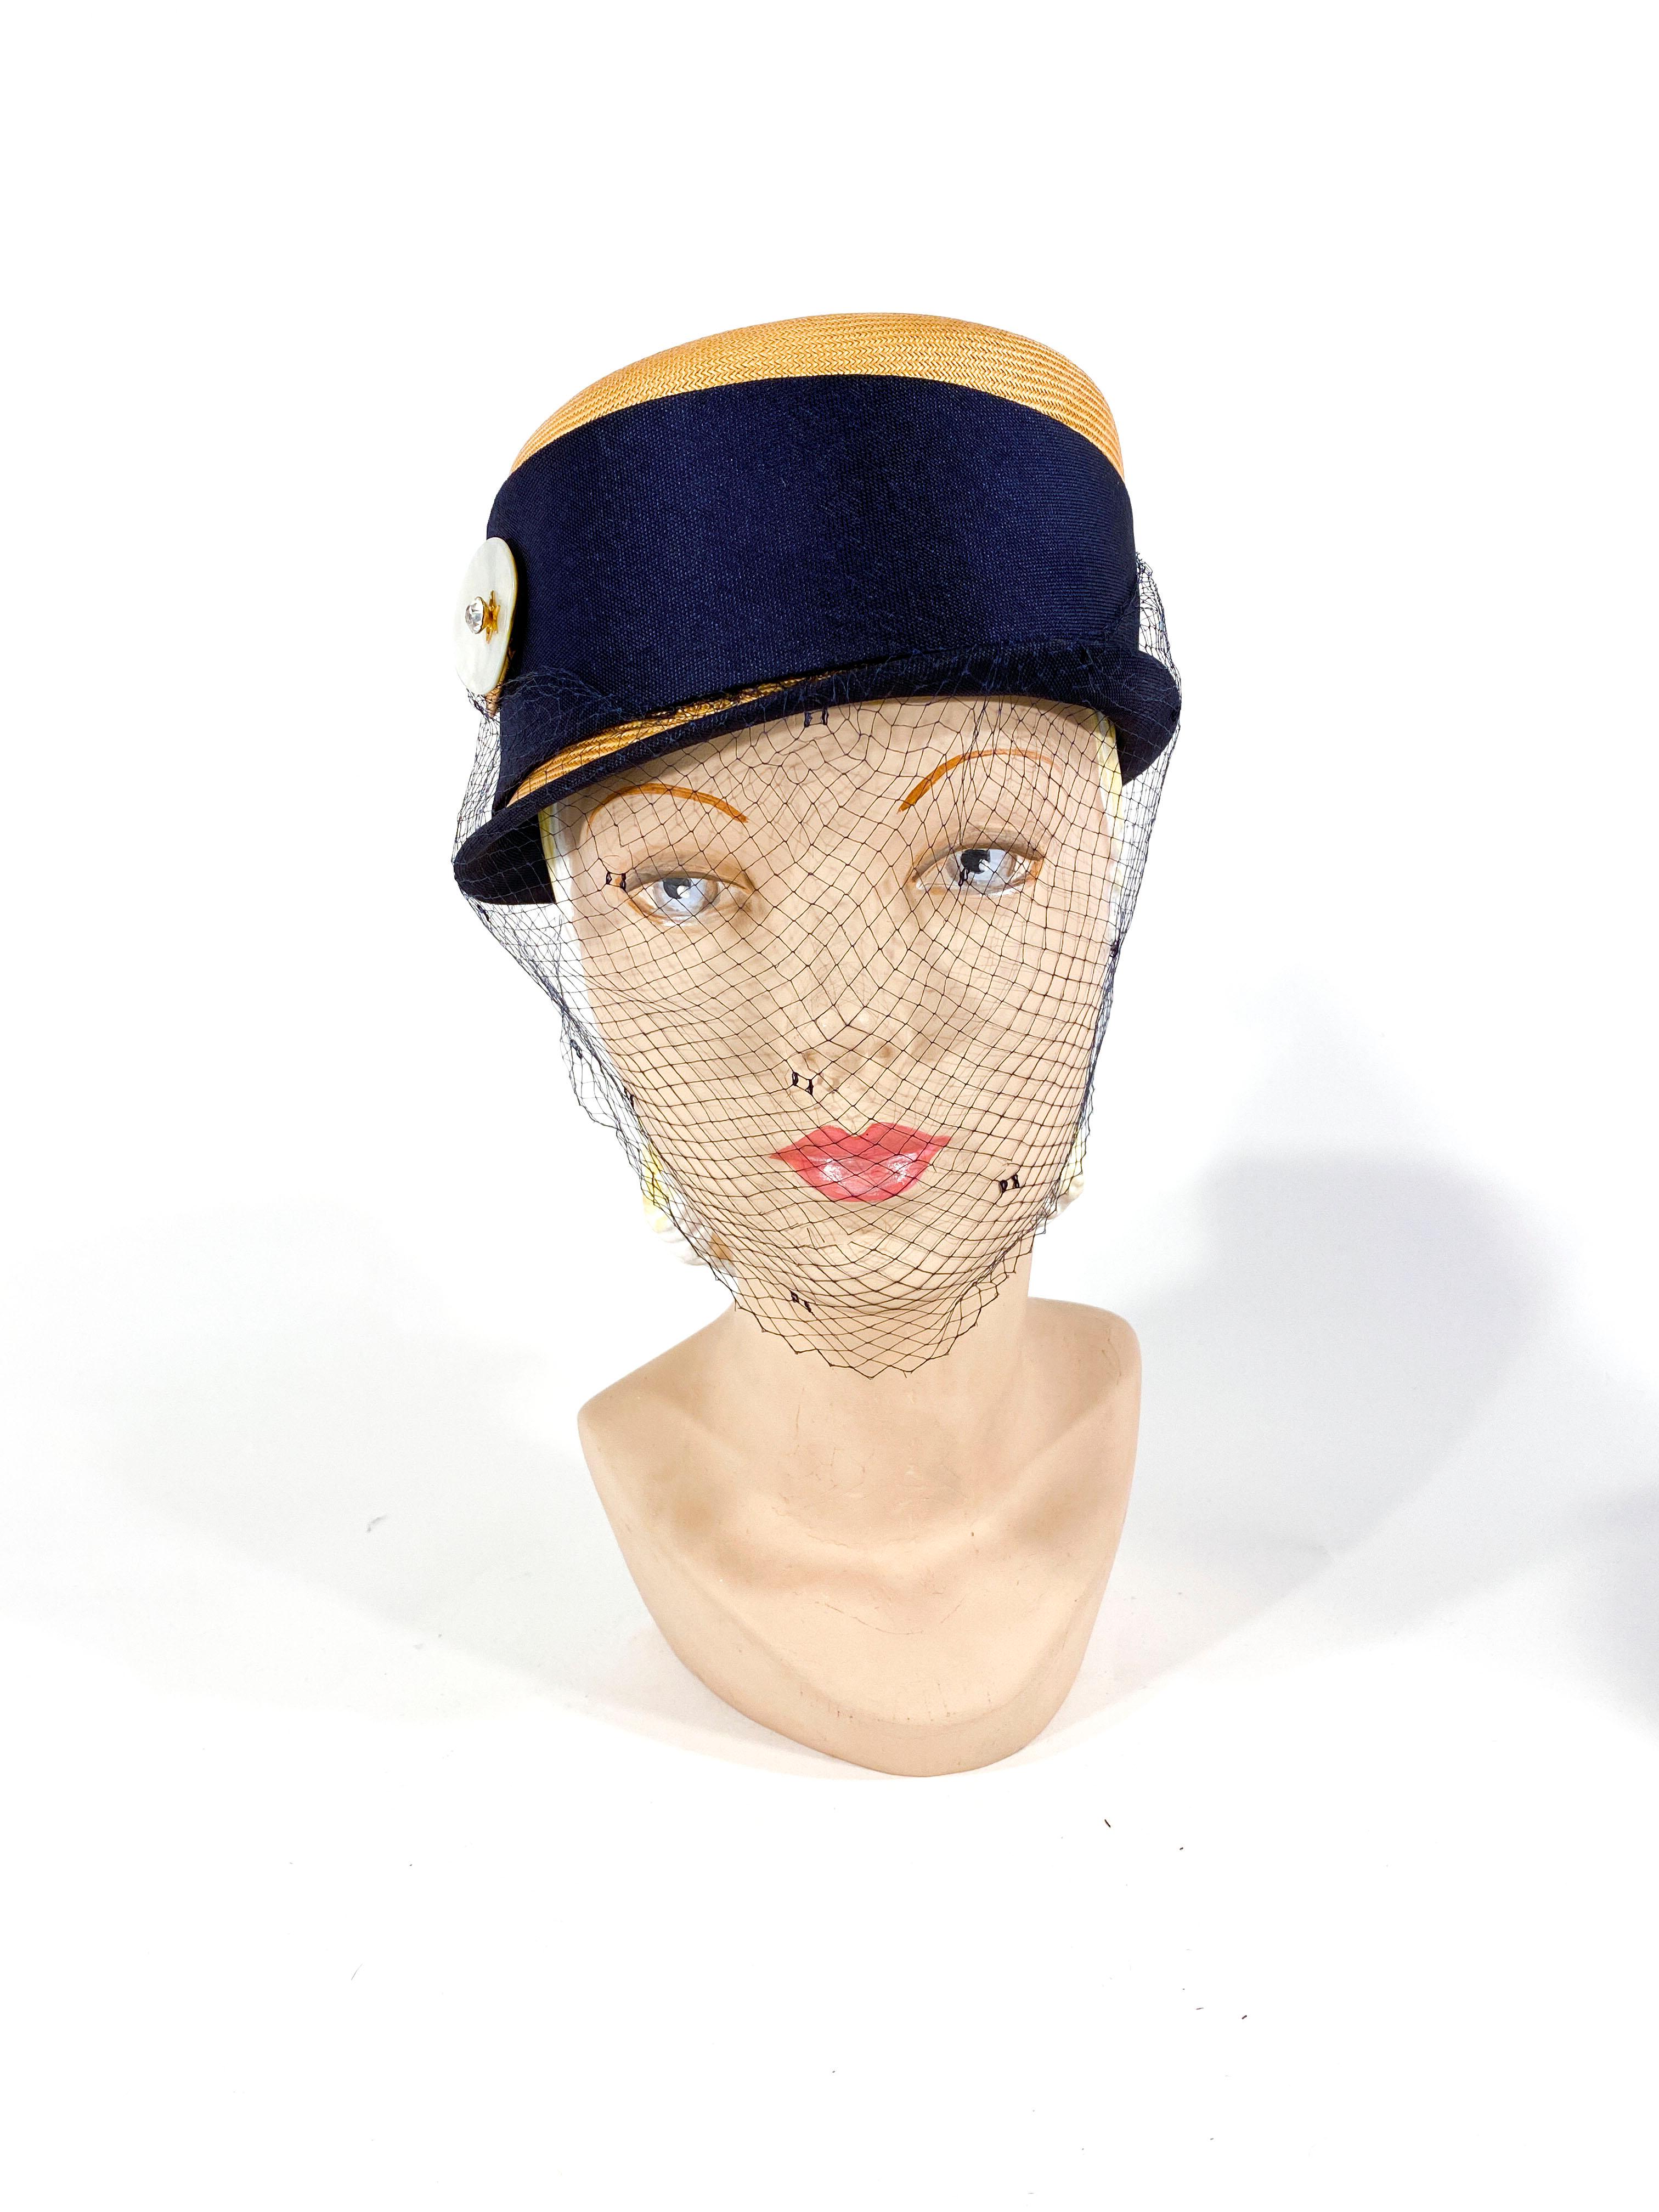 1950s natural panama woven modified pill box hat with a side brim, navy edging, a wide asymmetrical band. The band is sculpted with a hand cut abalone and jeweled button. The full-face veil is very dark navy blue and has a tie back function to